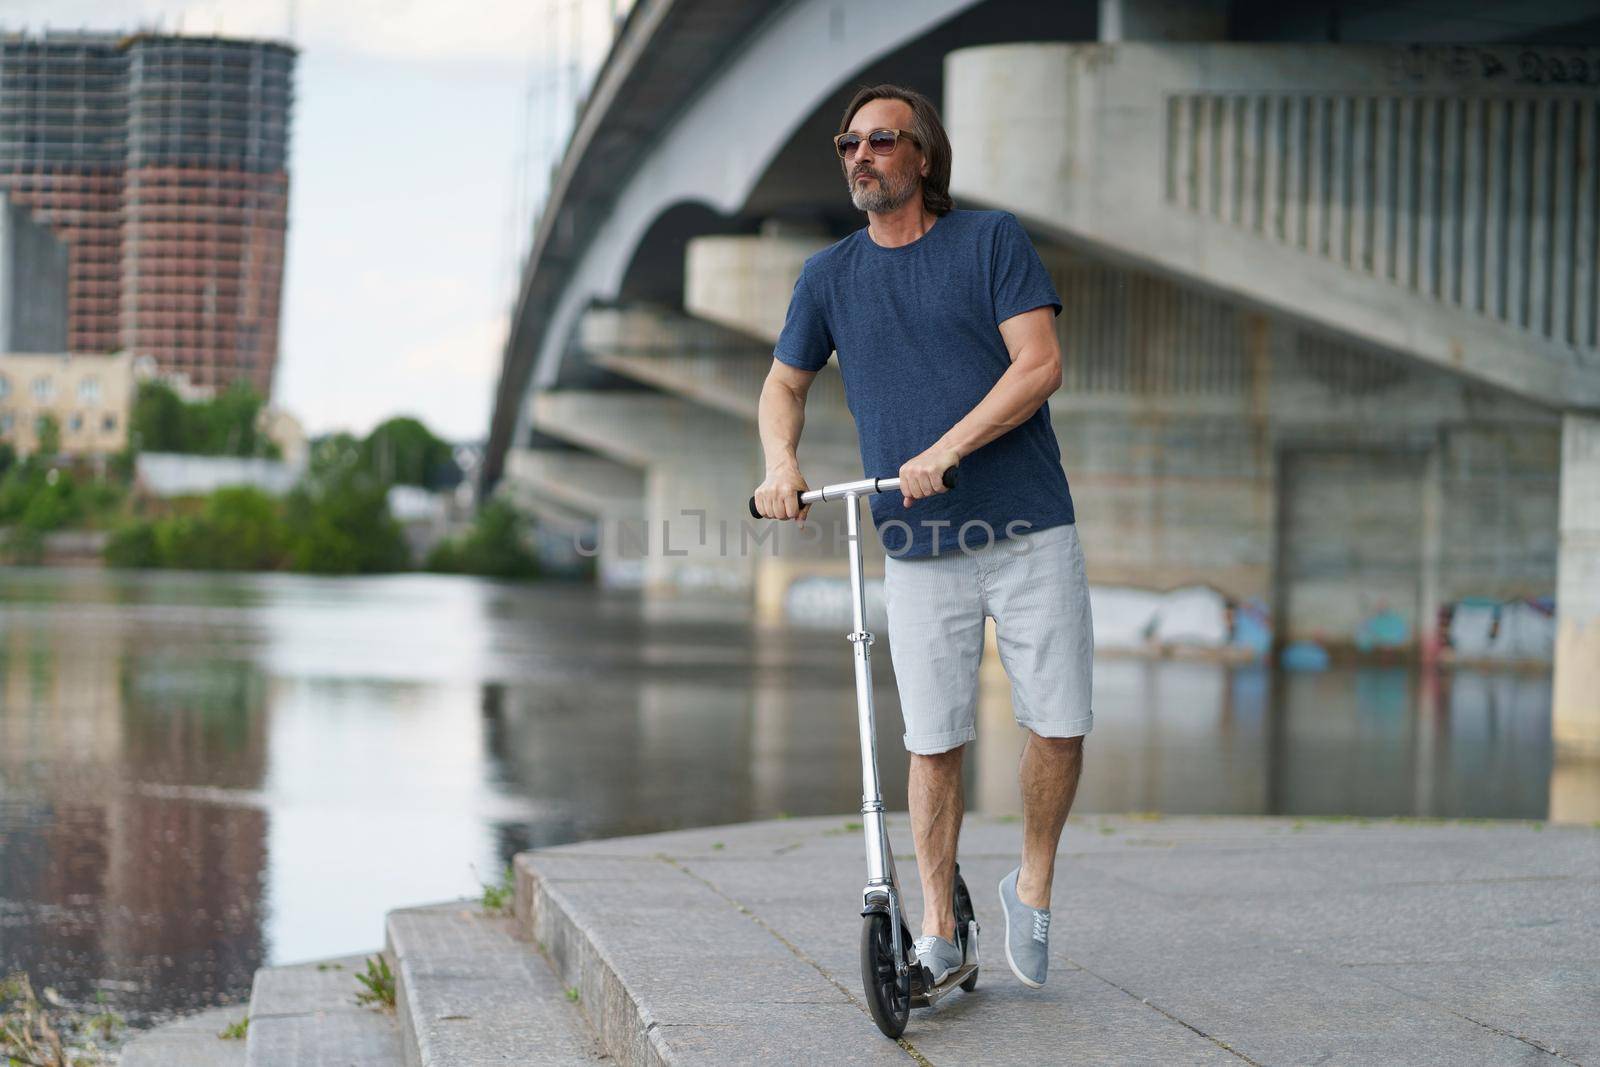 Riding scooter handsome stylish middle aged man with grey beard stand under town bridge over river with urban city on background after work outdoors. Travel, lifestyle concept by LipikStockMedia